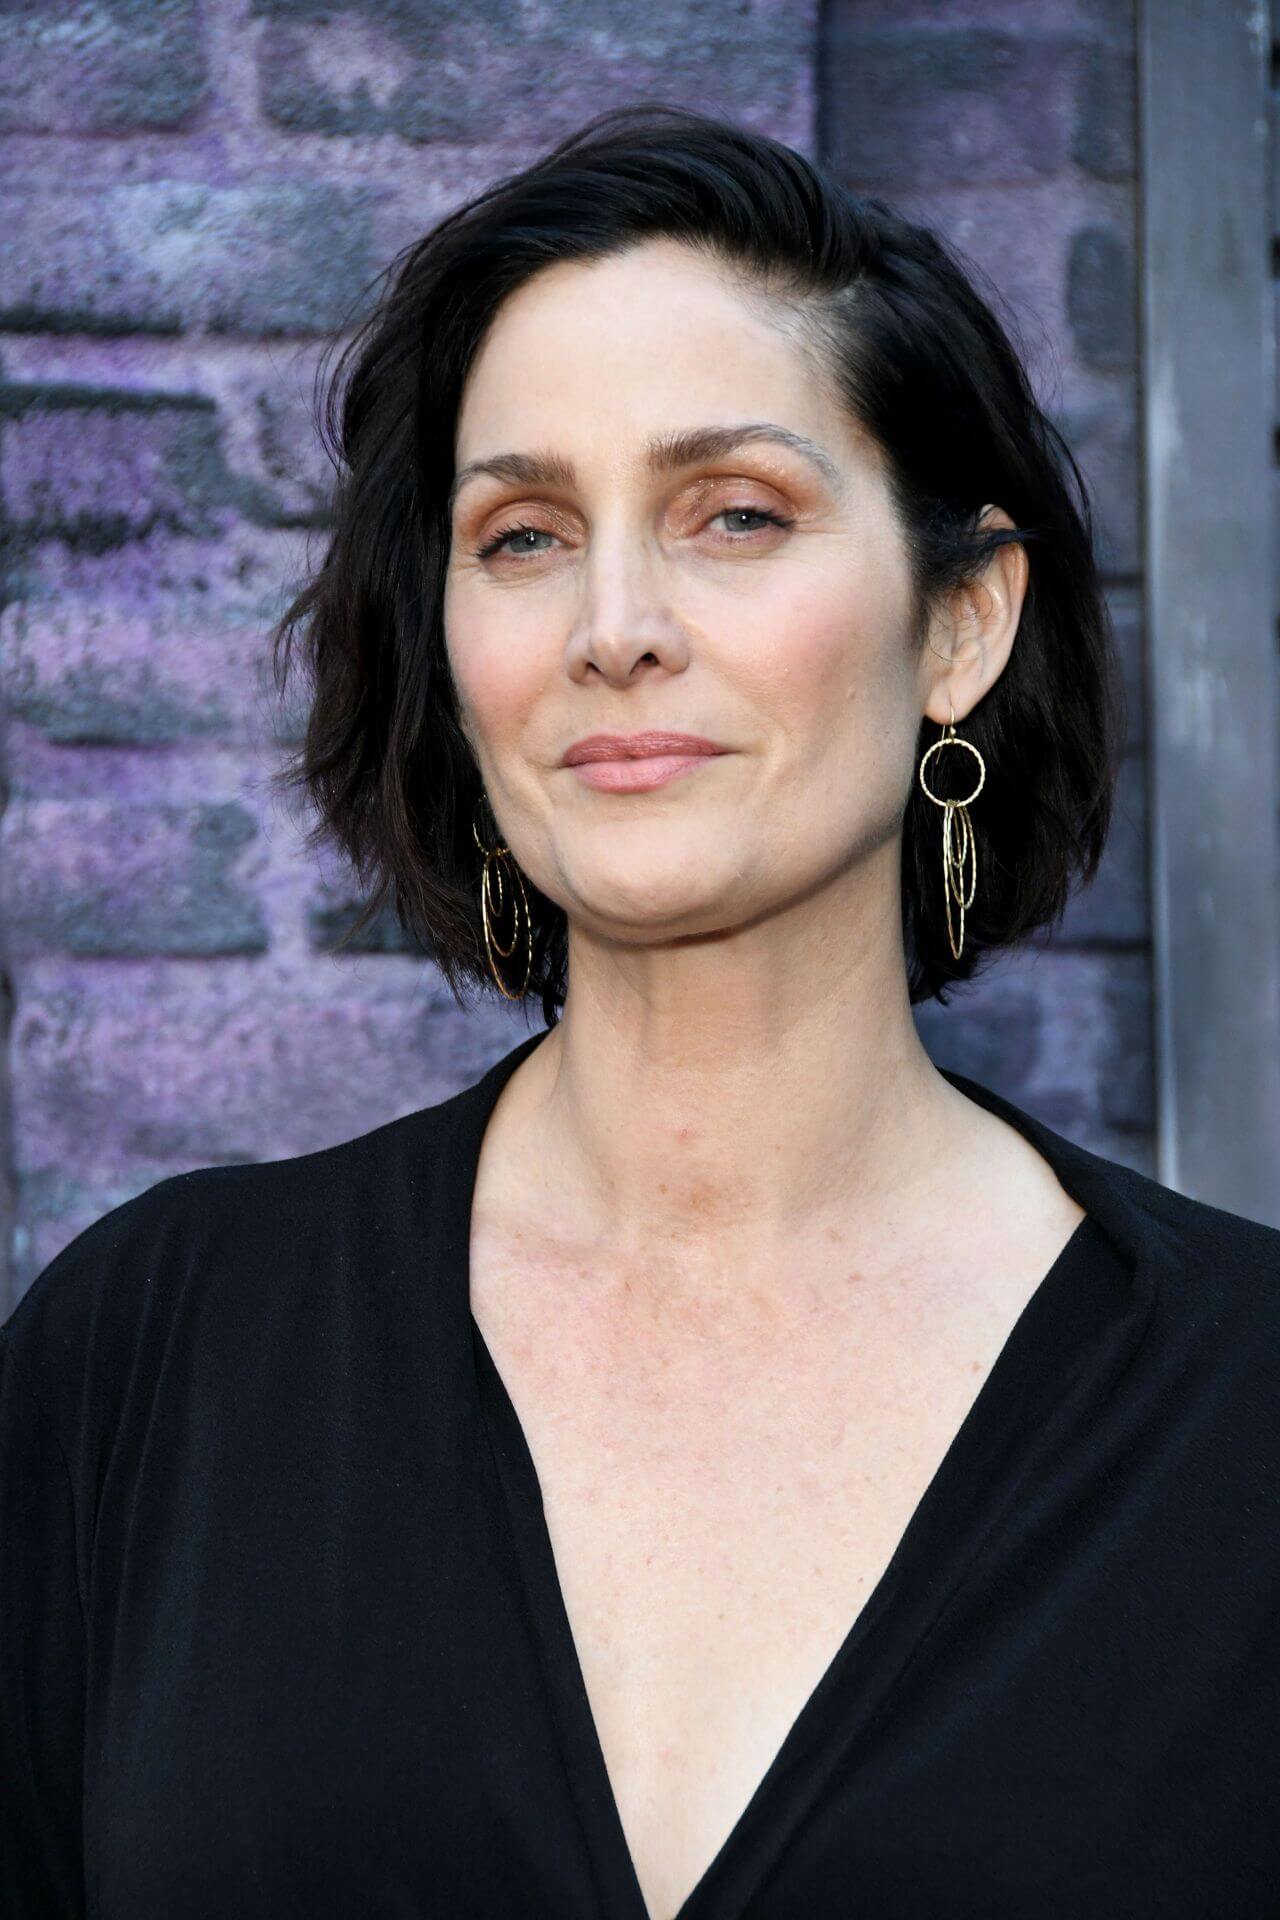 70+ Hot Pictures Of Carrie Anne Moss Will Drive You Nuts For Her 378